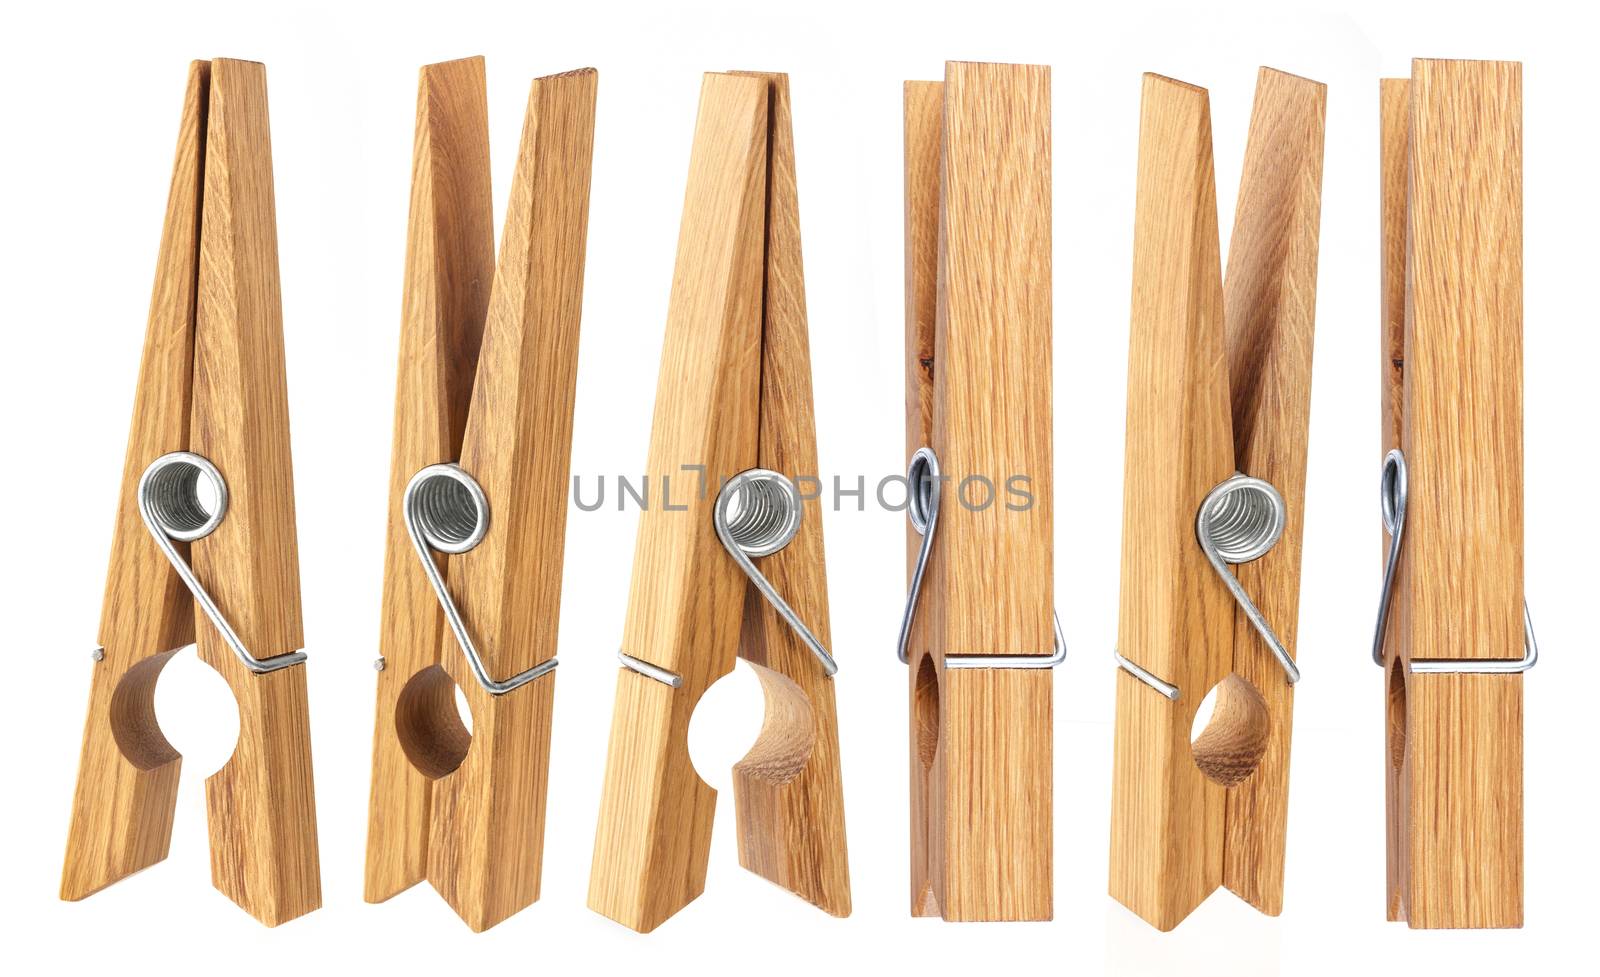 Set of wooden clothespins isolated on white background with clipping path